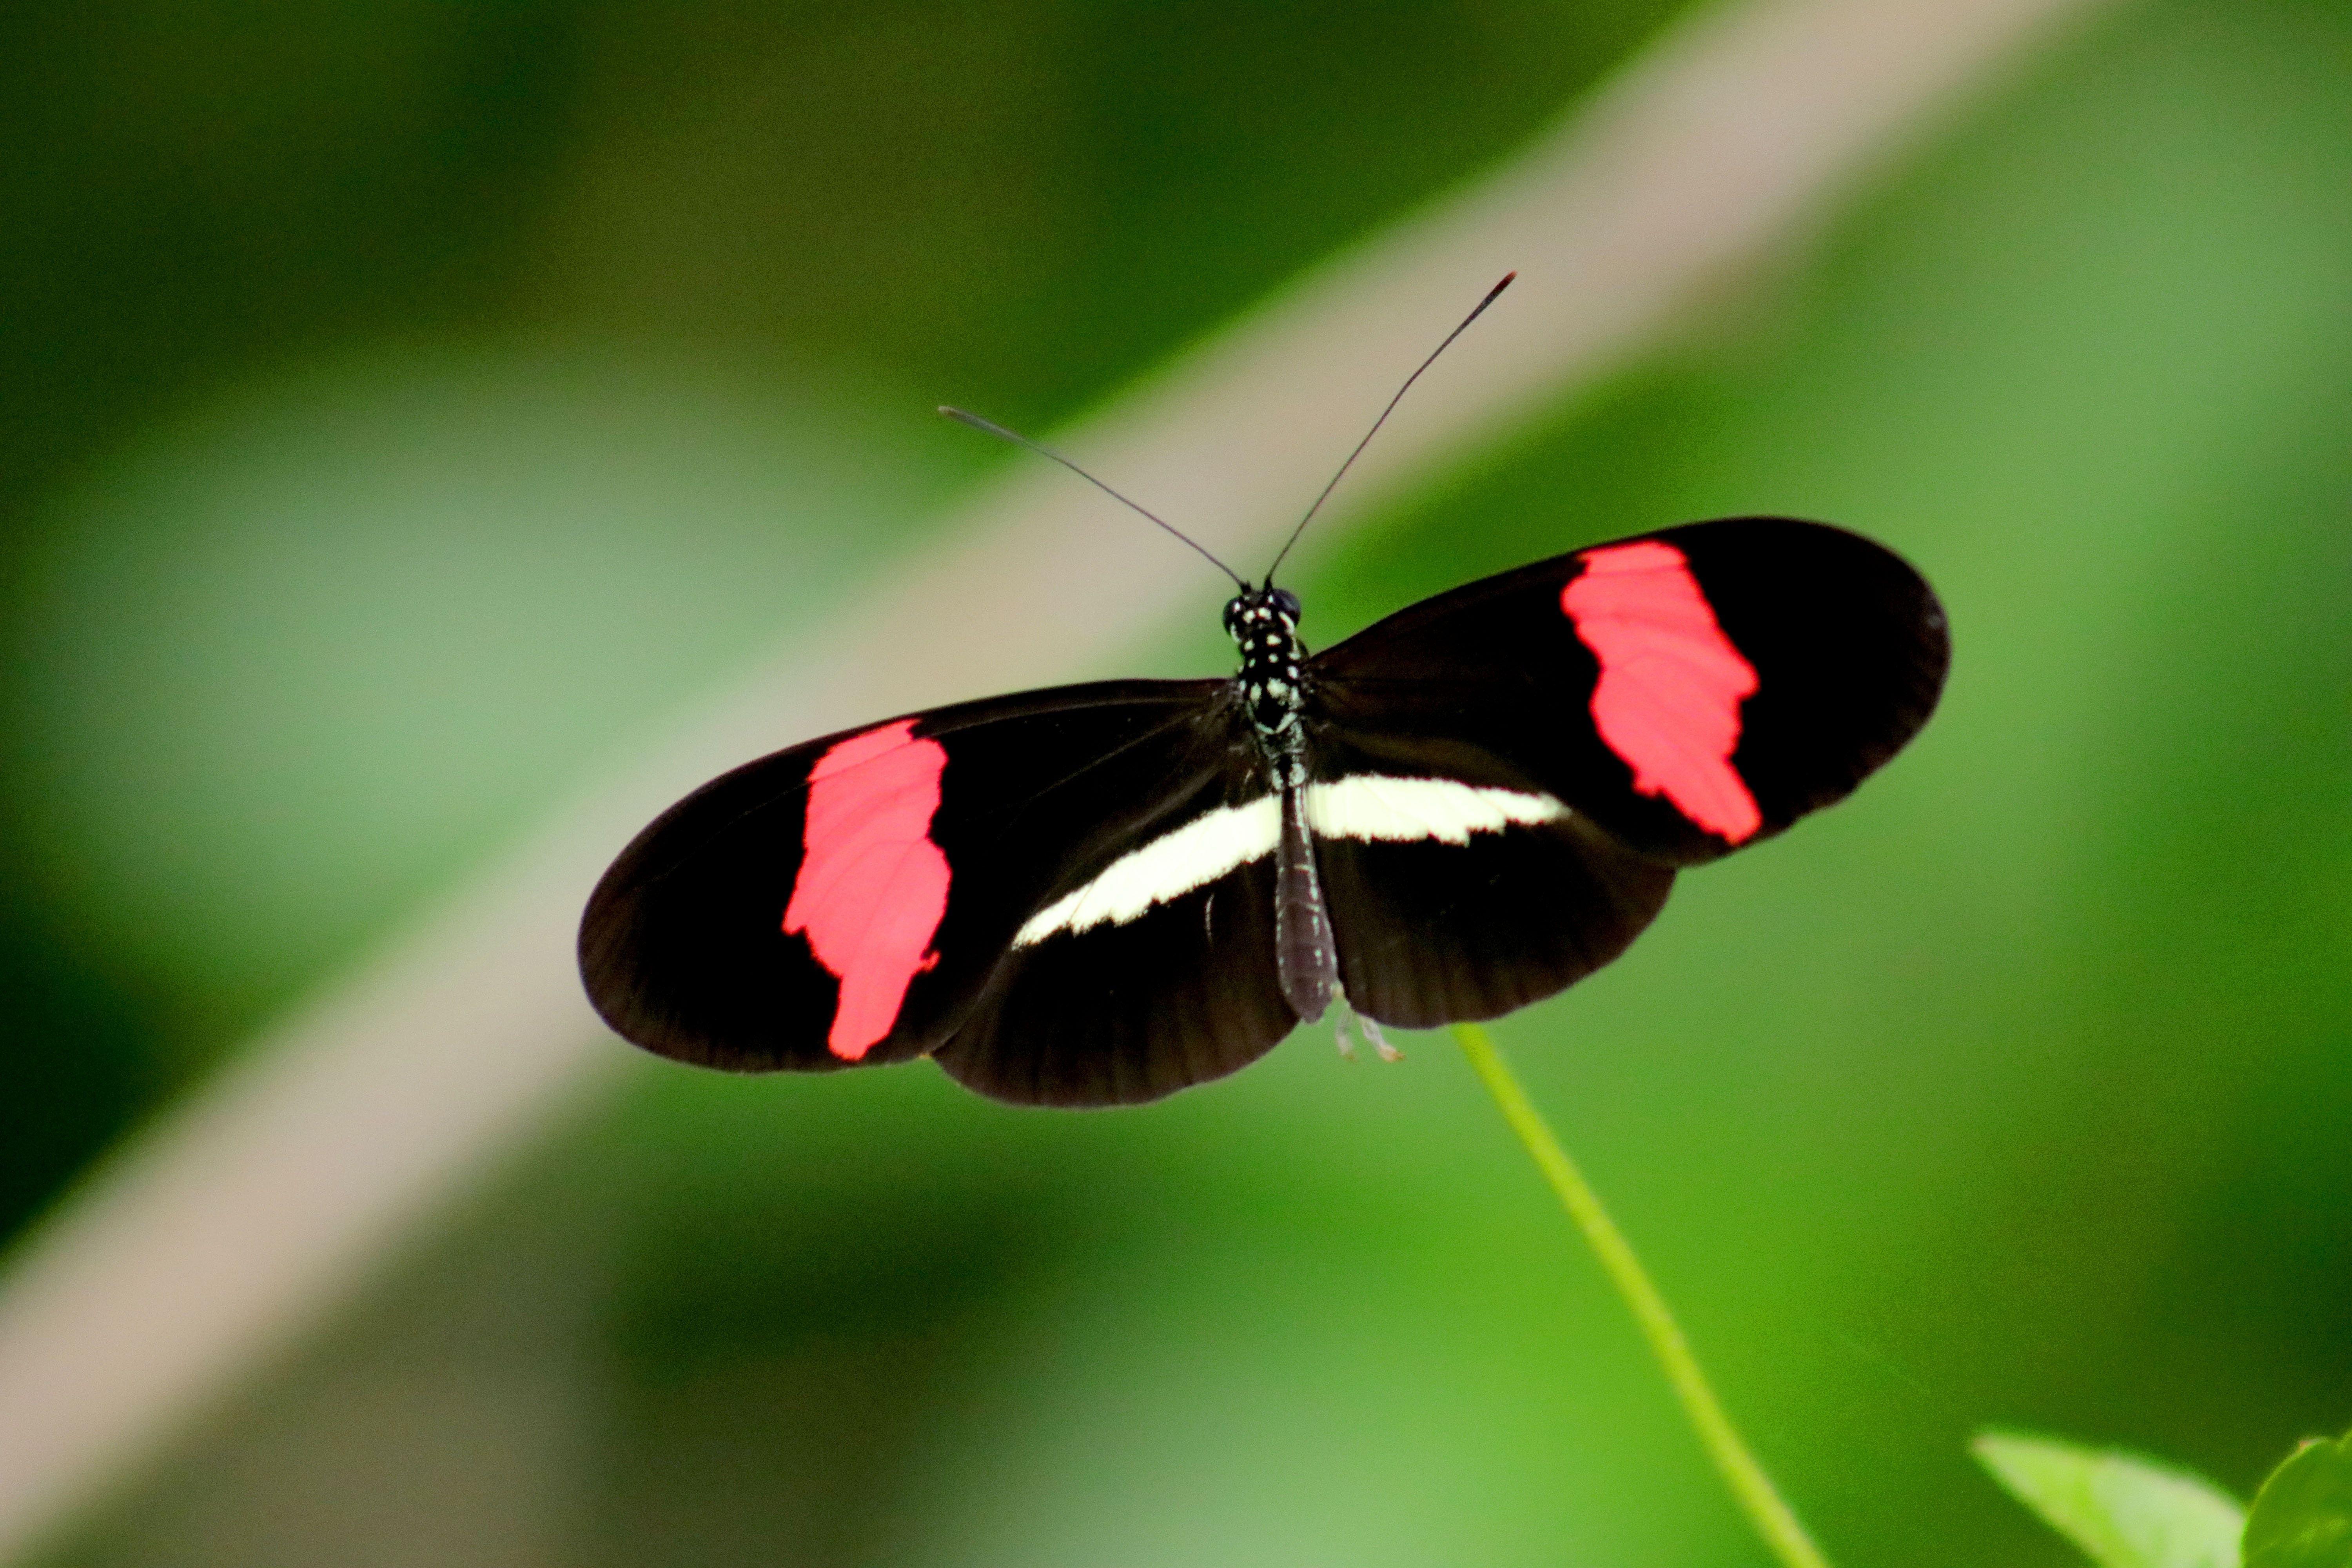 Black and Red Butterfly Logo - Black, Red, and White Butterfly in Closeup Photo · Free Stock Photo